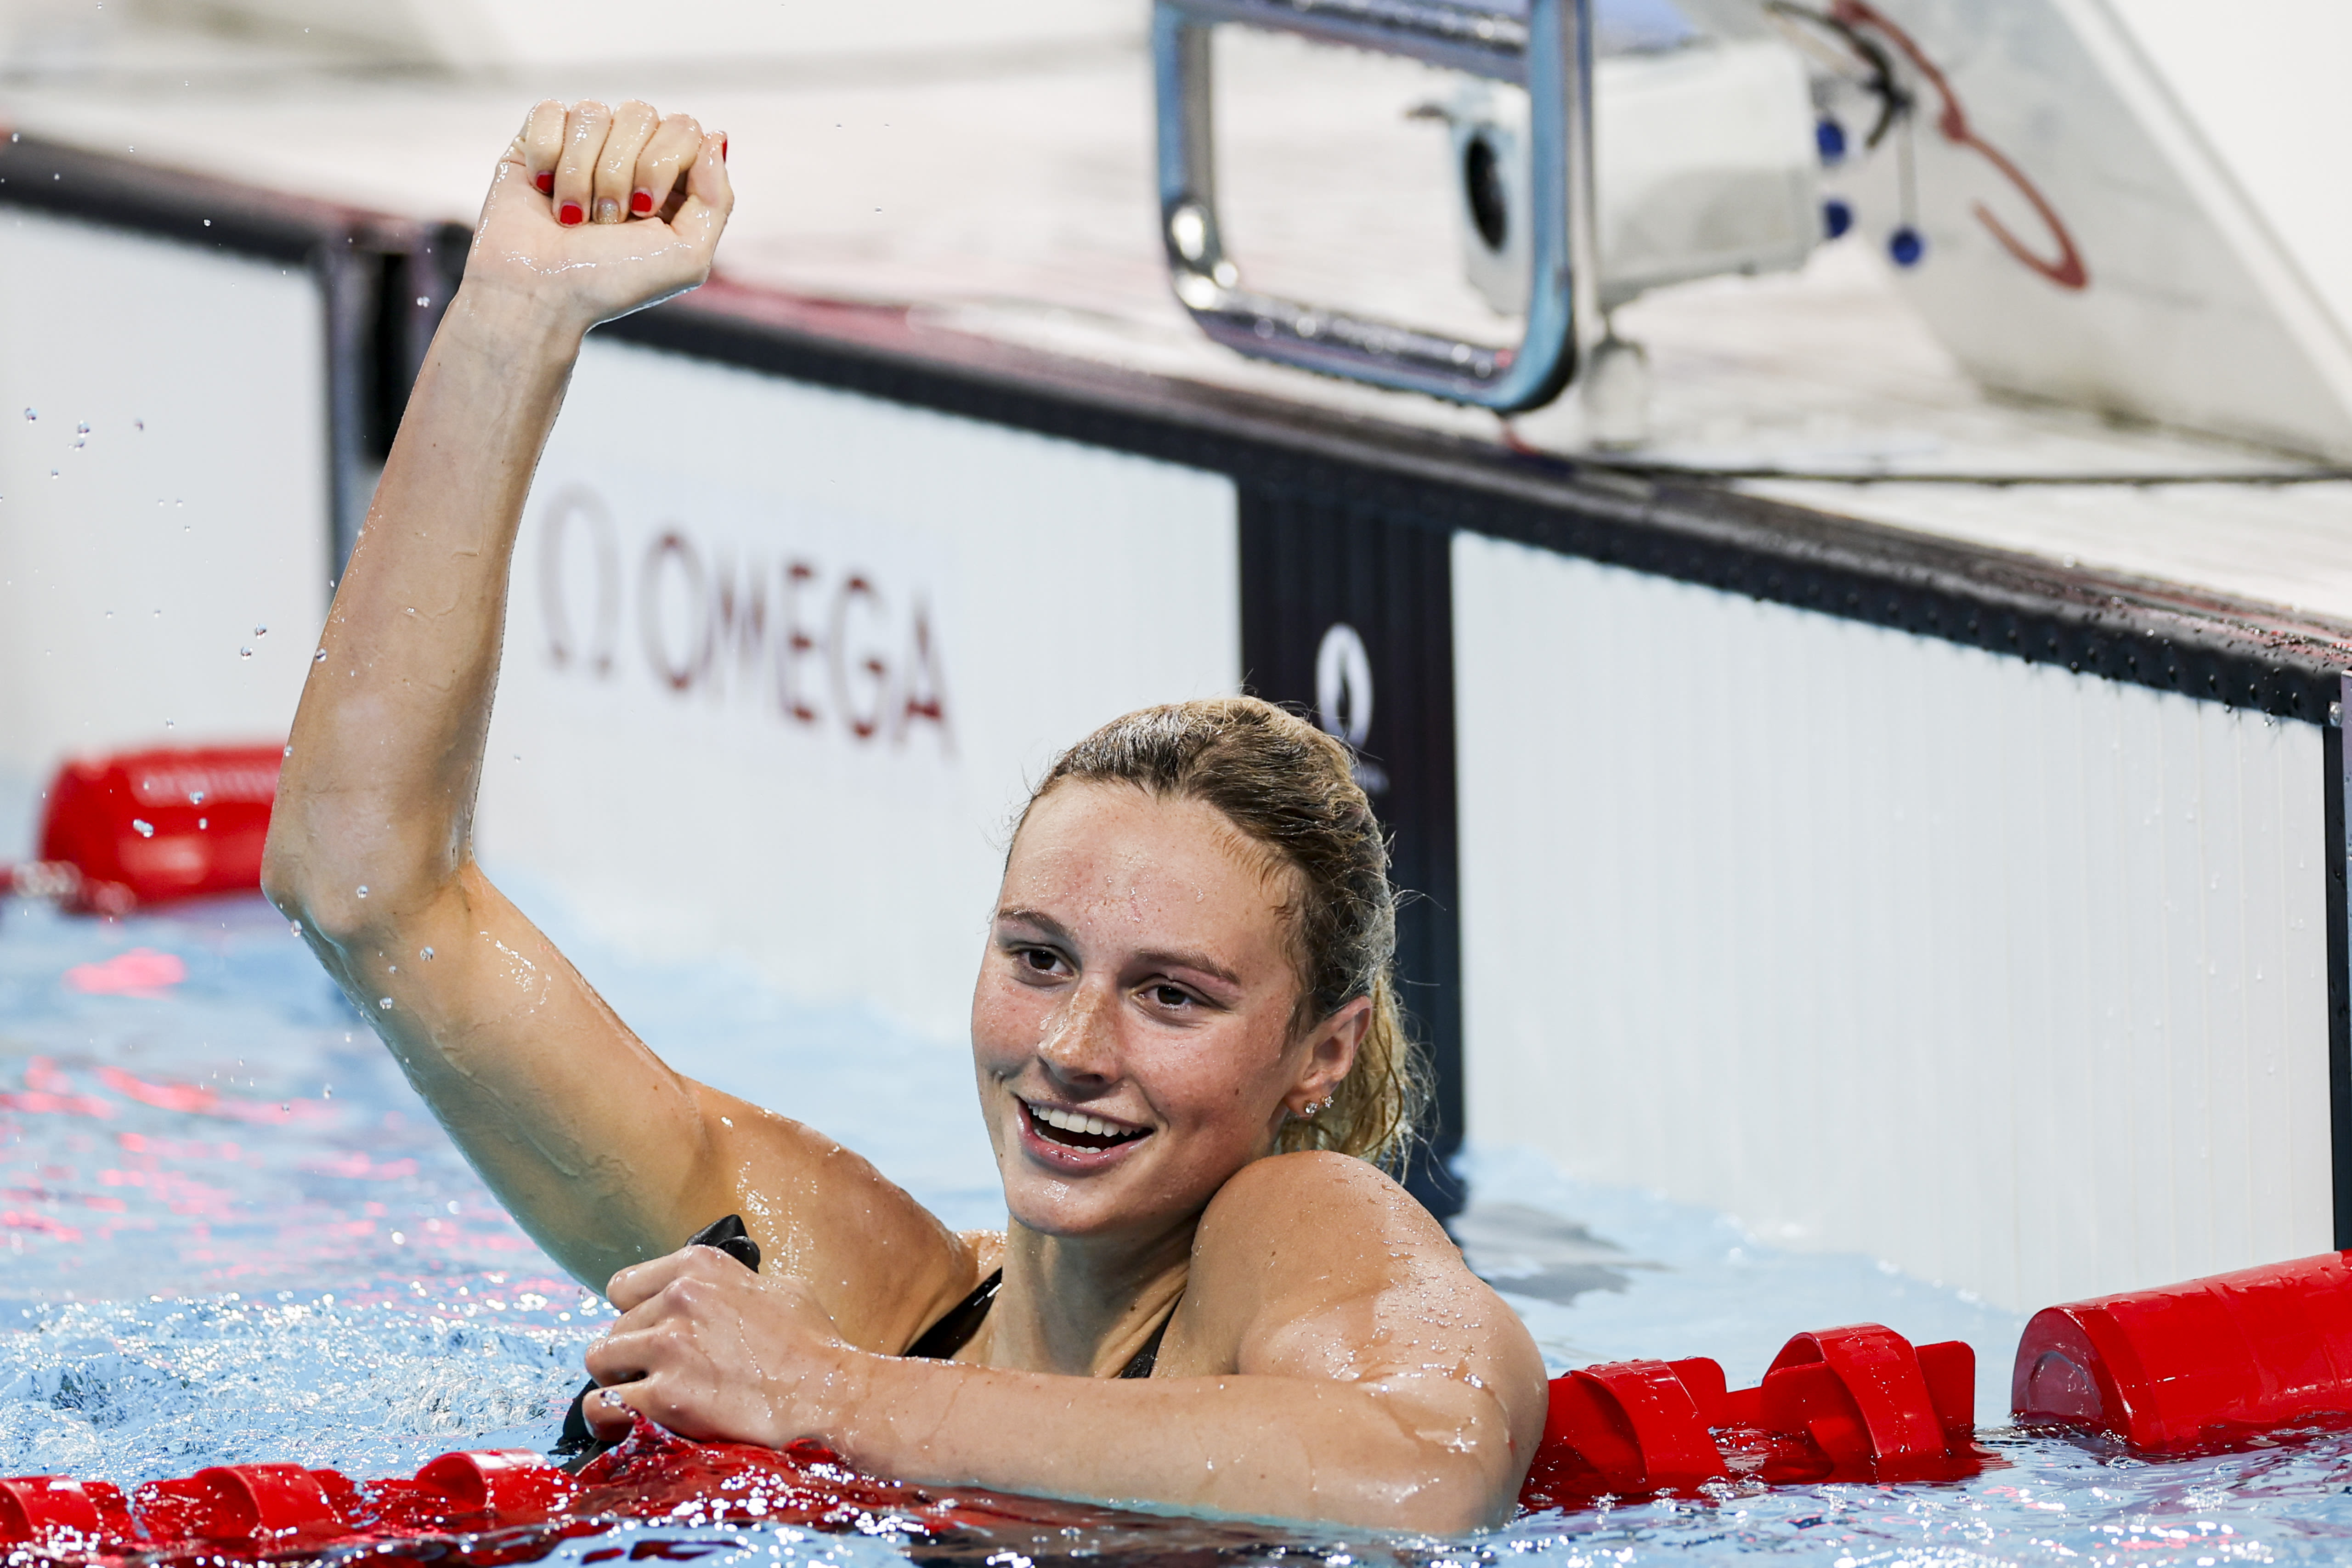 A 'speed demon' and 'goddess': Summer McIntosh celebrated by Canadians as sports experts break down her historic Olympics performance